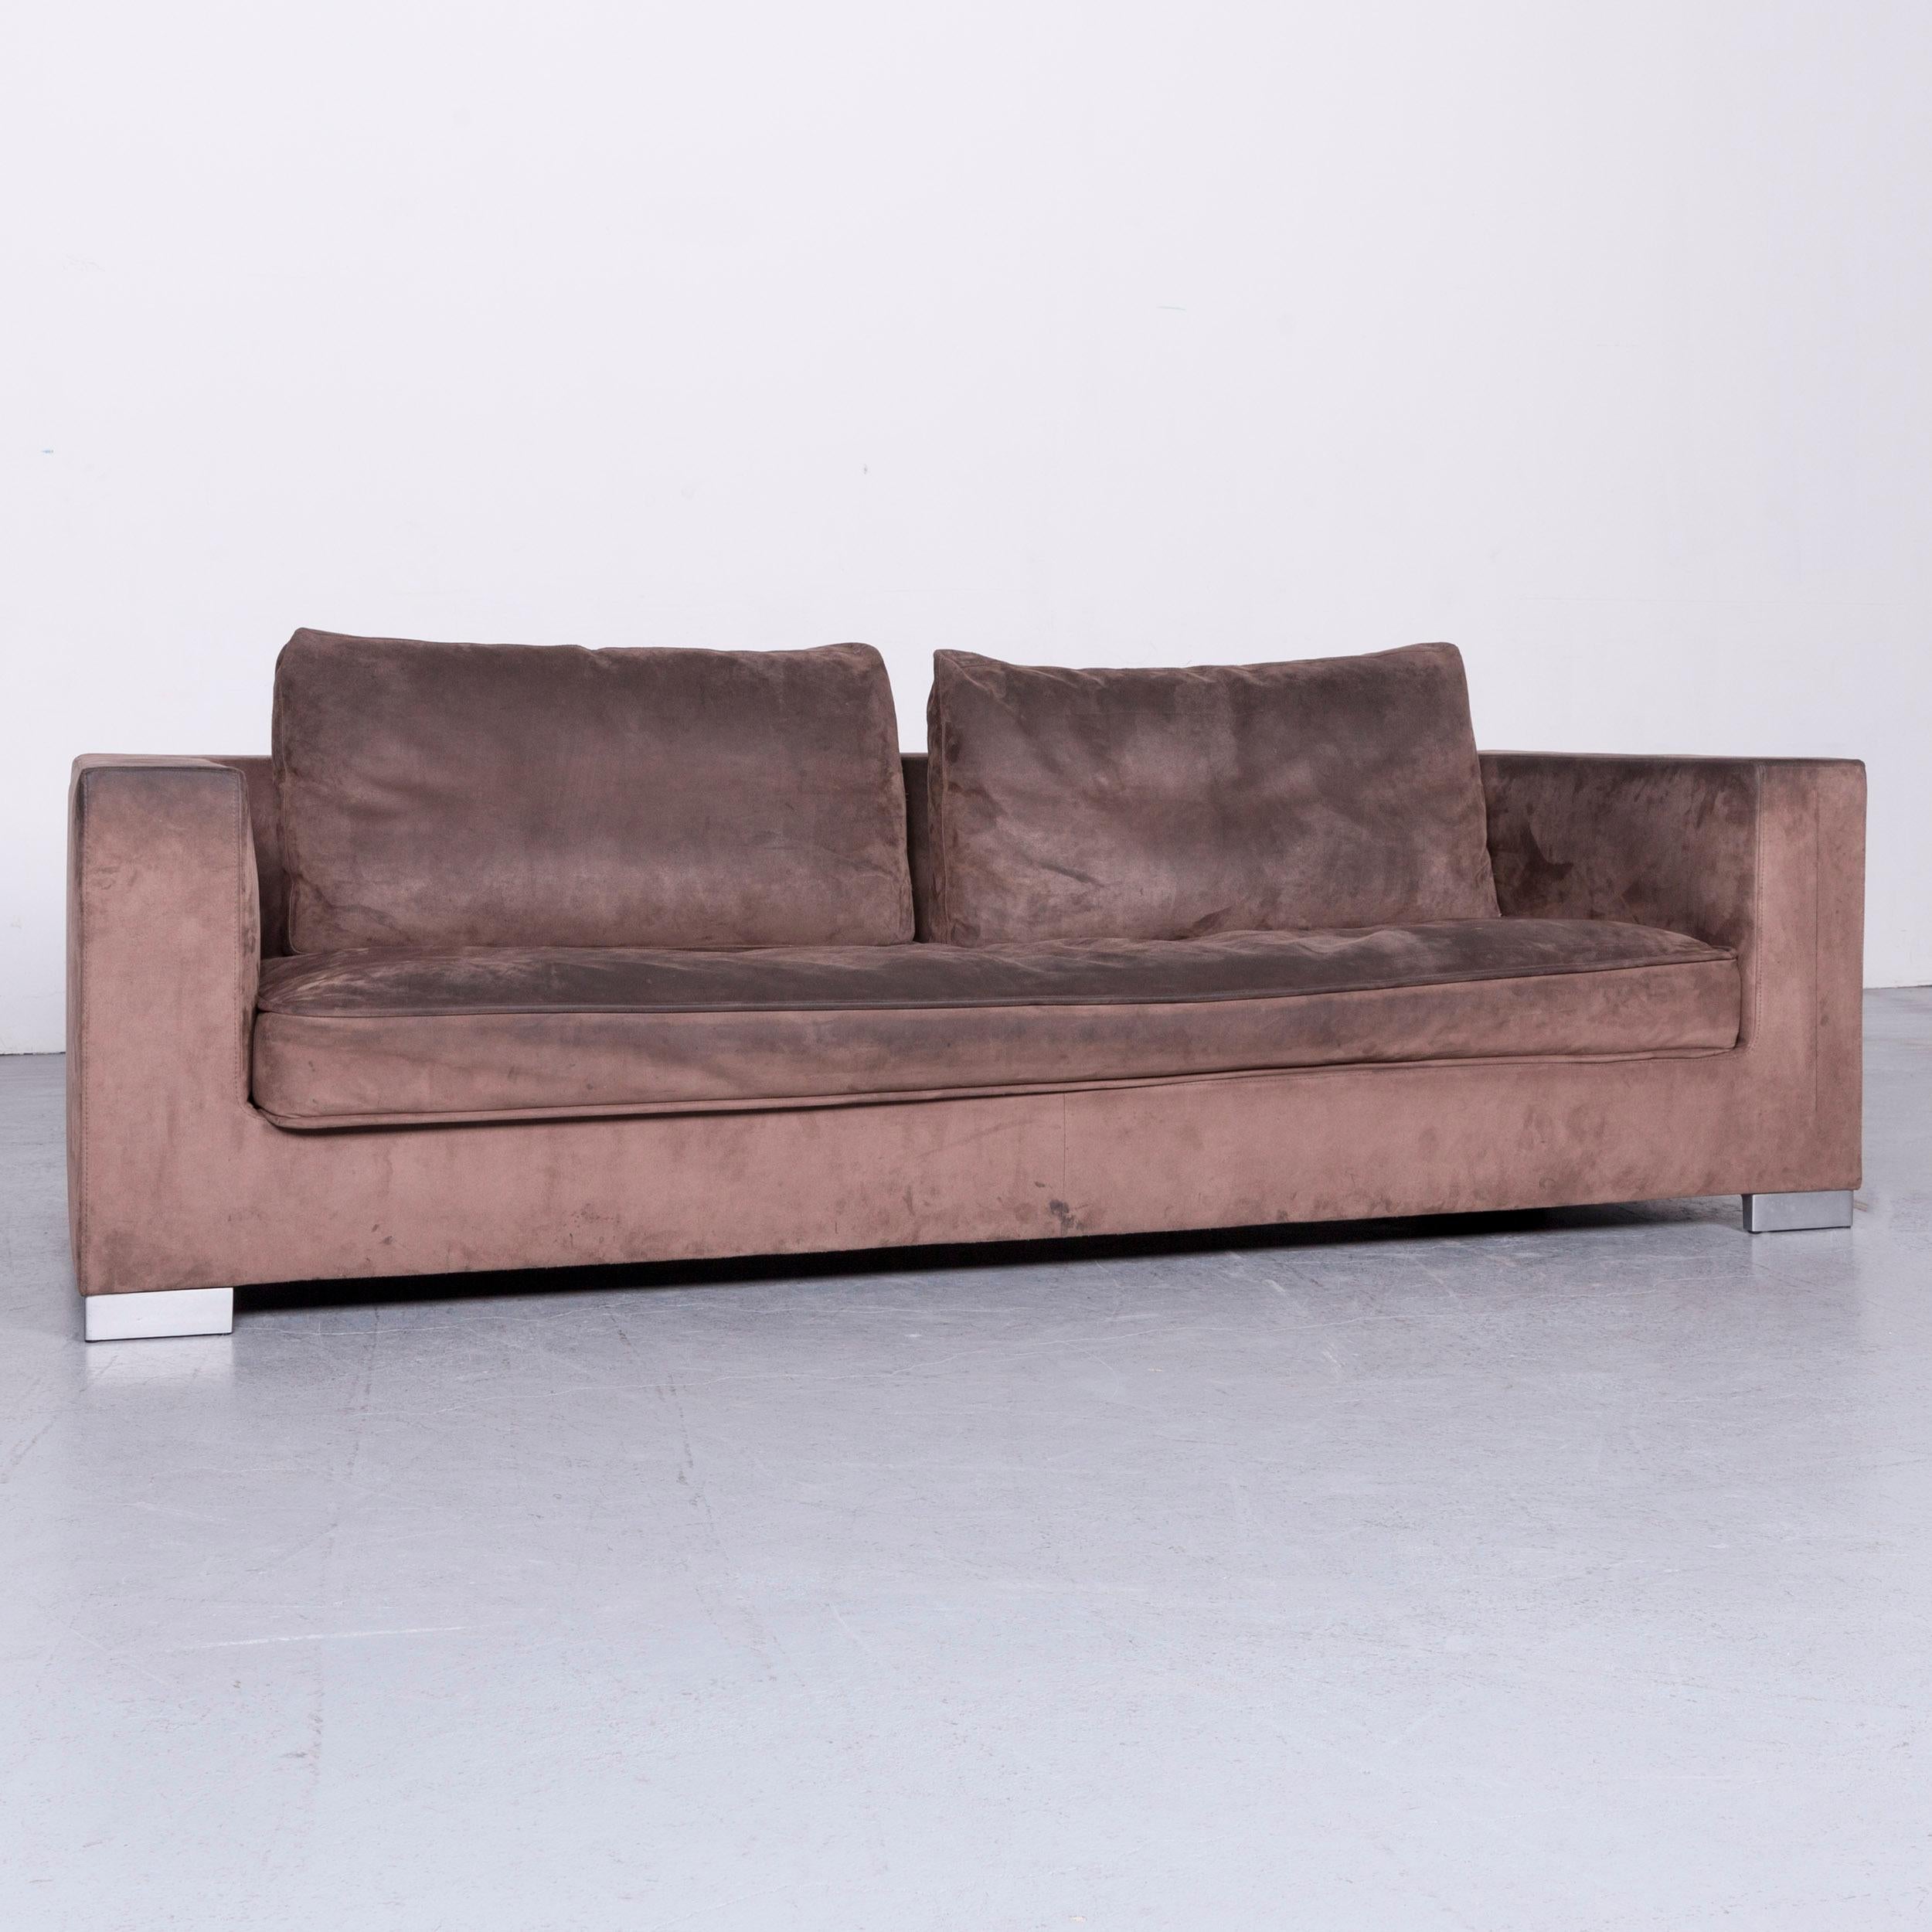 French Ligne Roset Rive Gauche Designer Fabric Sofa Footstool Set Brown Two-Seat Couch